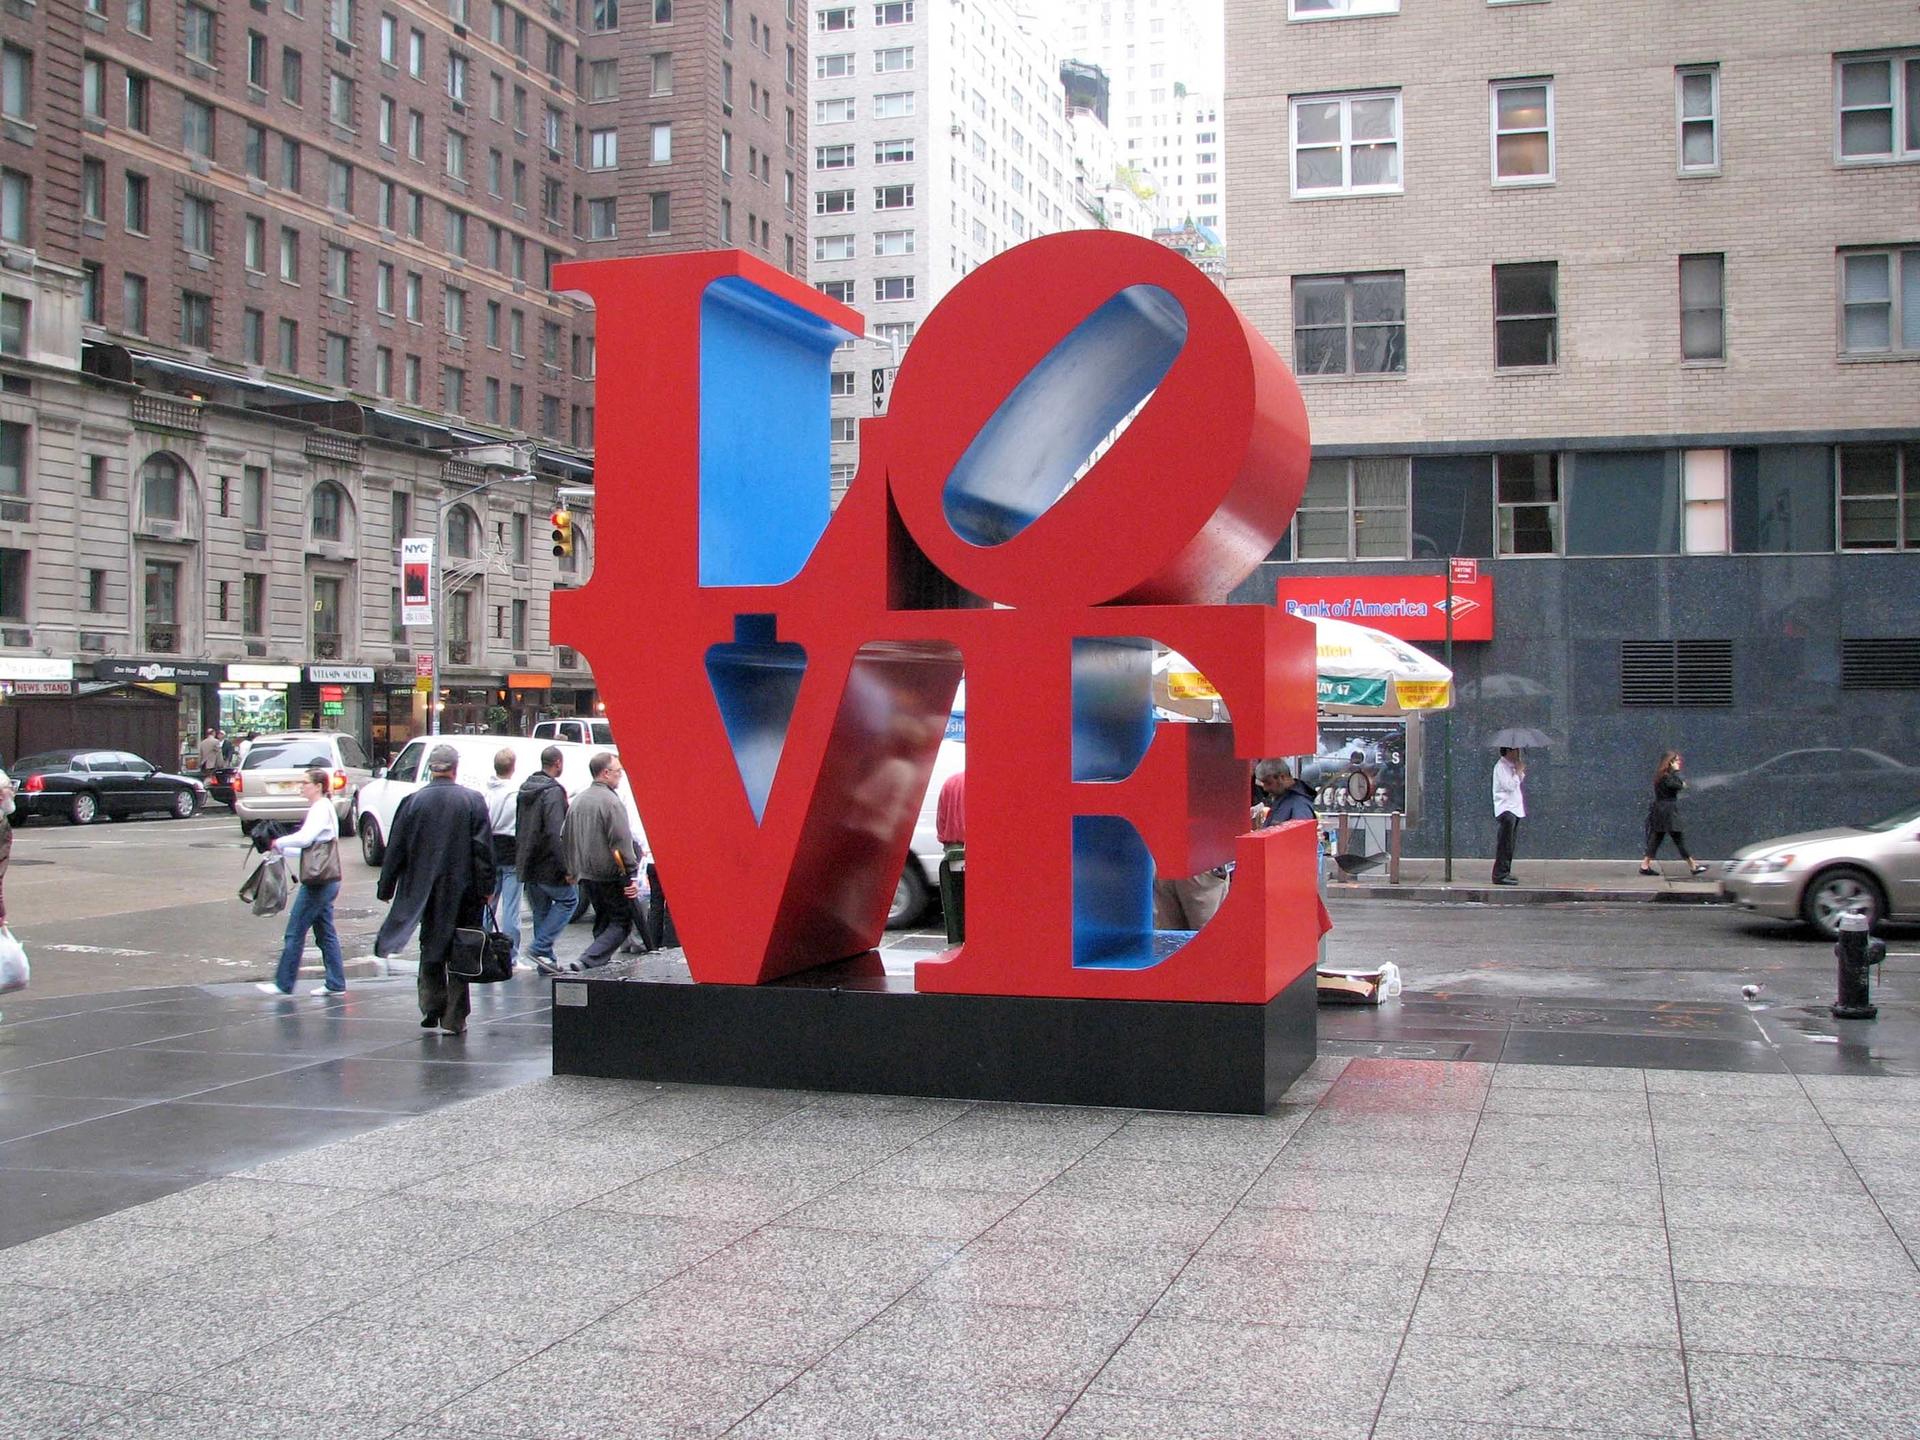 LOVE sculpture by Robert Indiana, on the corner of 6th Avenue and 55th Street in New York © Wikimedia Commons